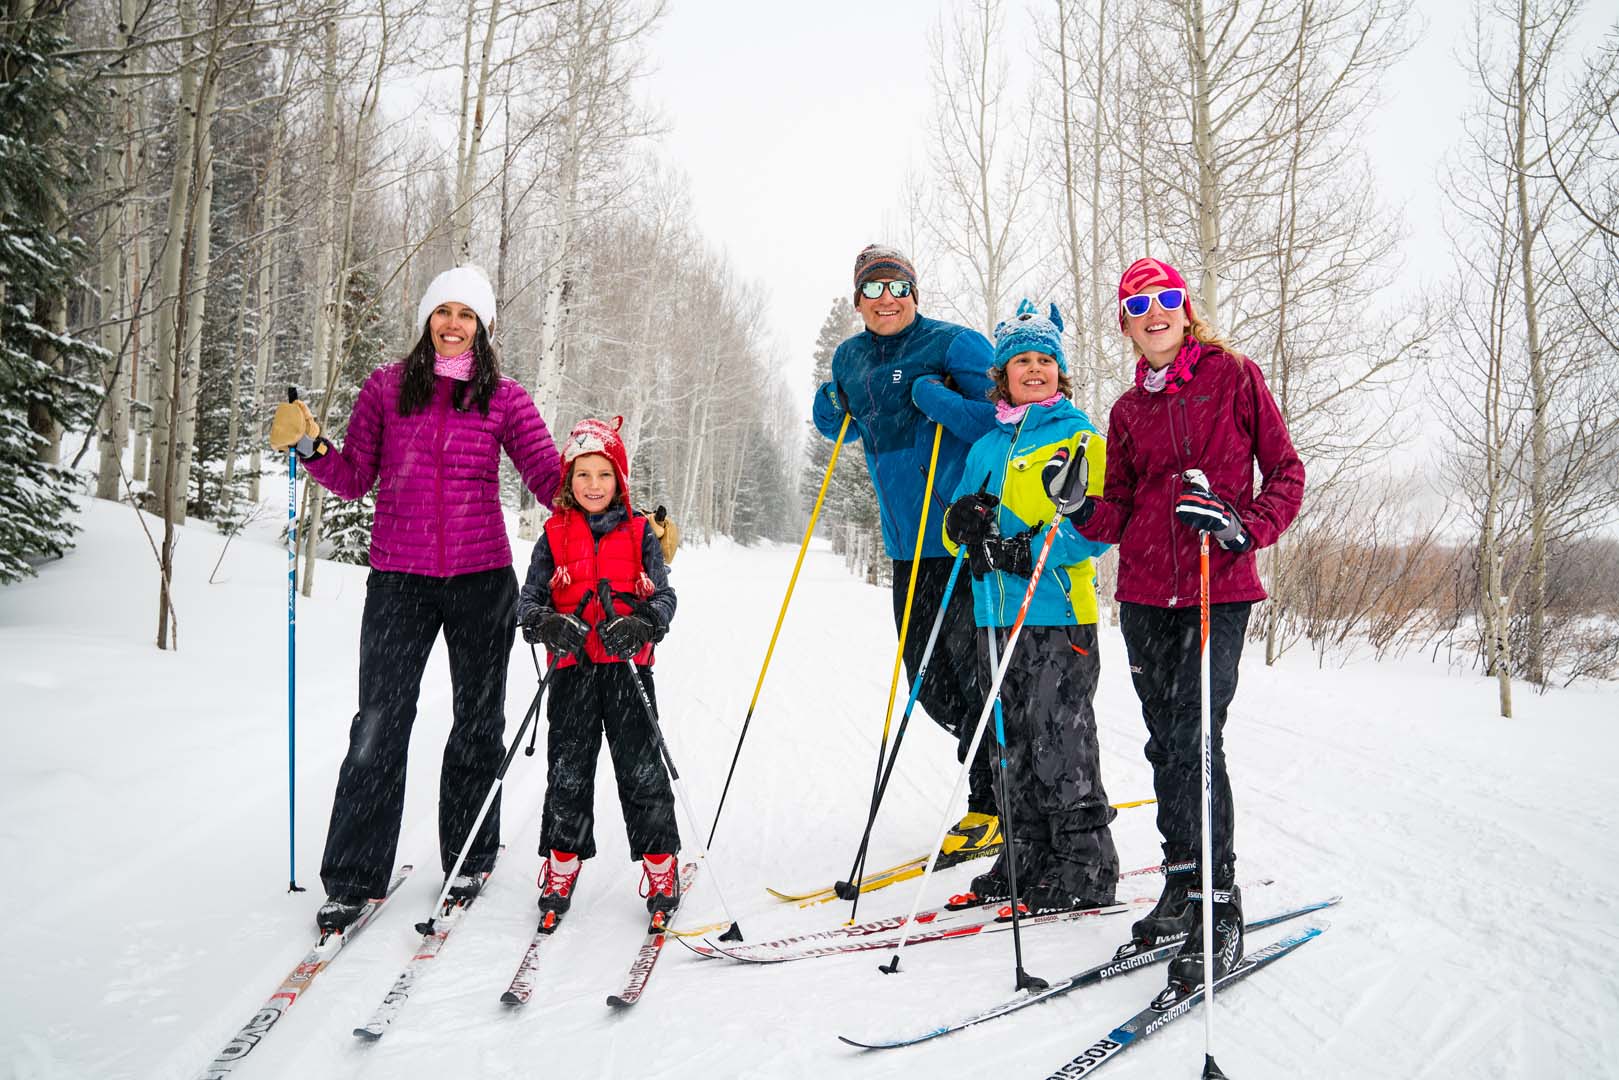 Four people cross country skiing with trees surrounding